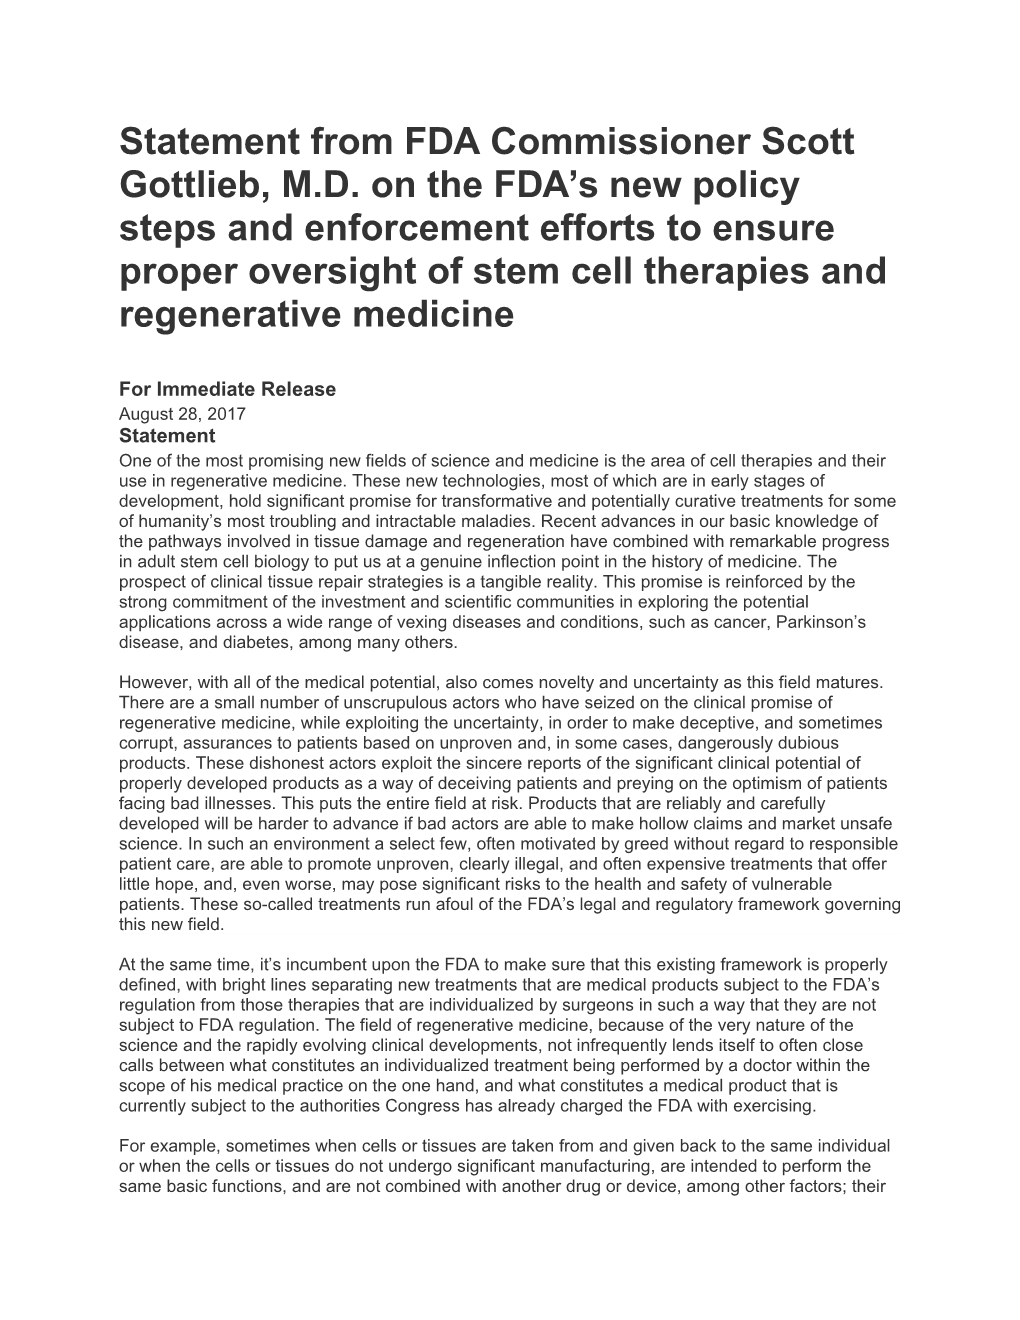 Statement from FDA Commissioner Scott Gottlieb, M.D. on the FDA S New Policy Steps And